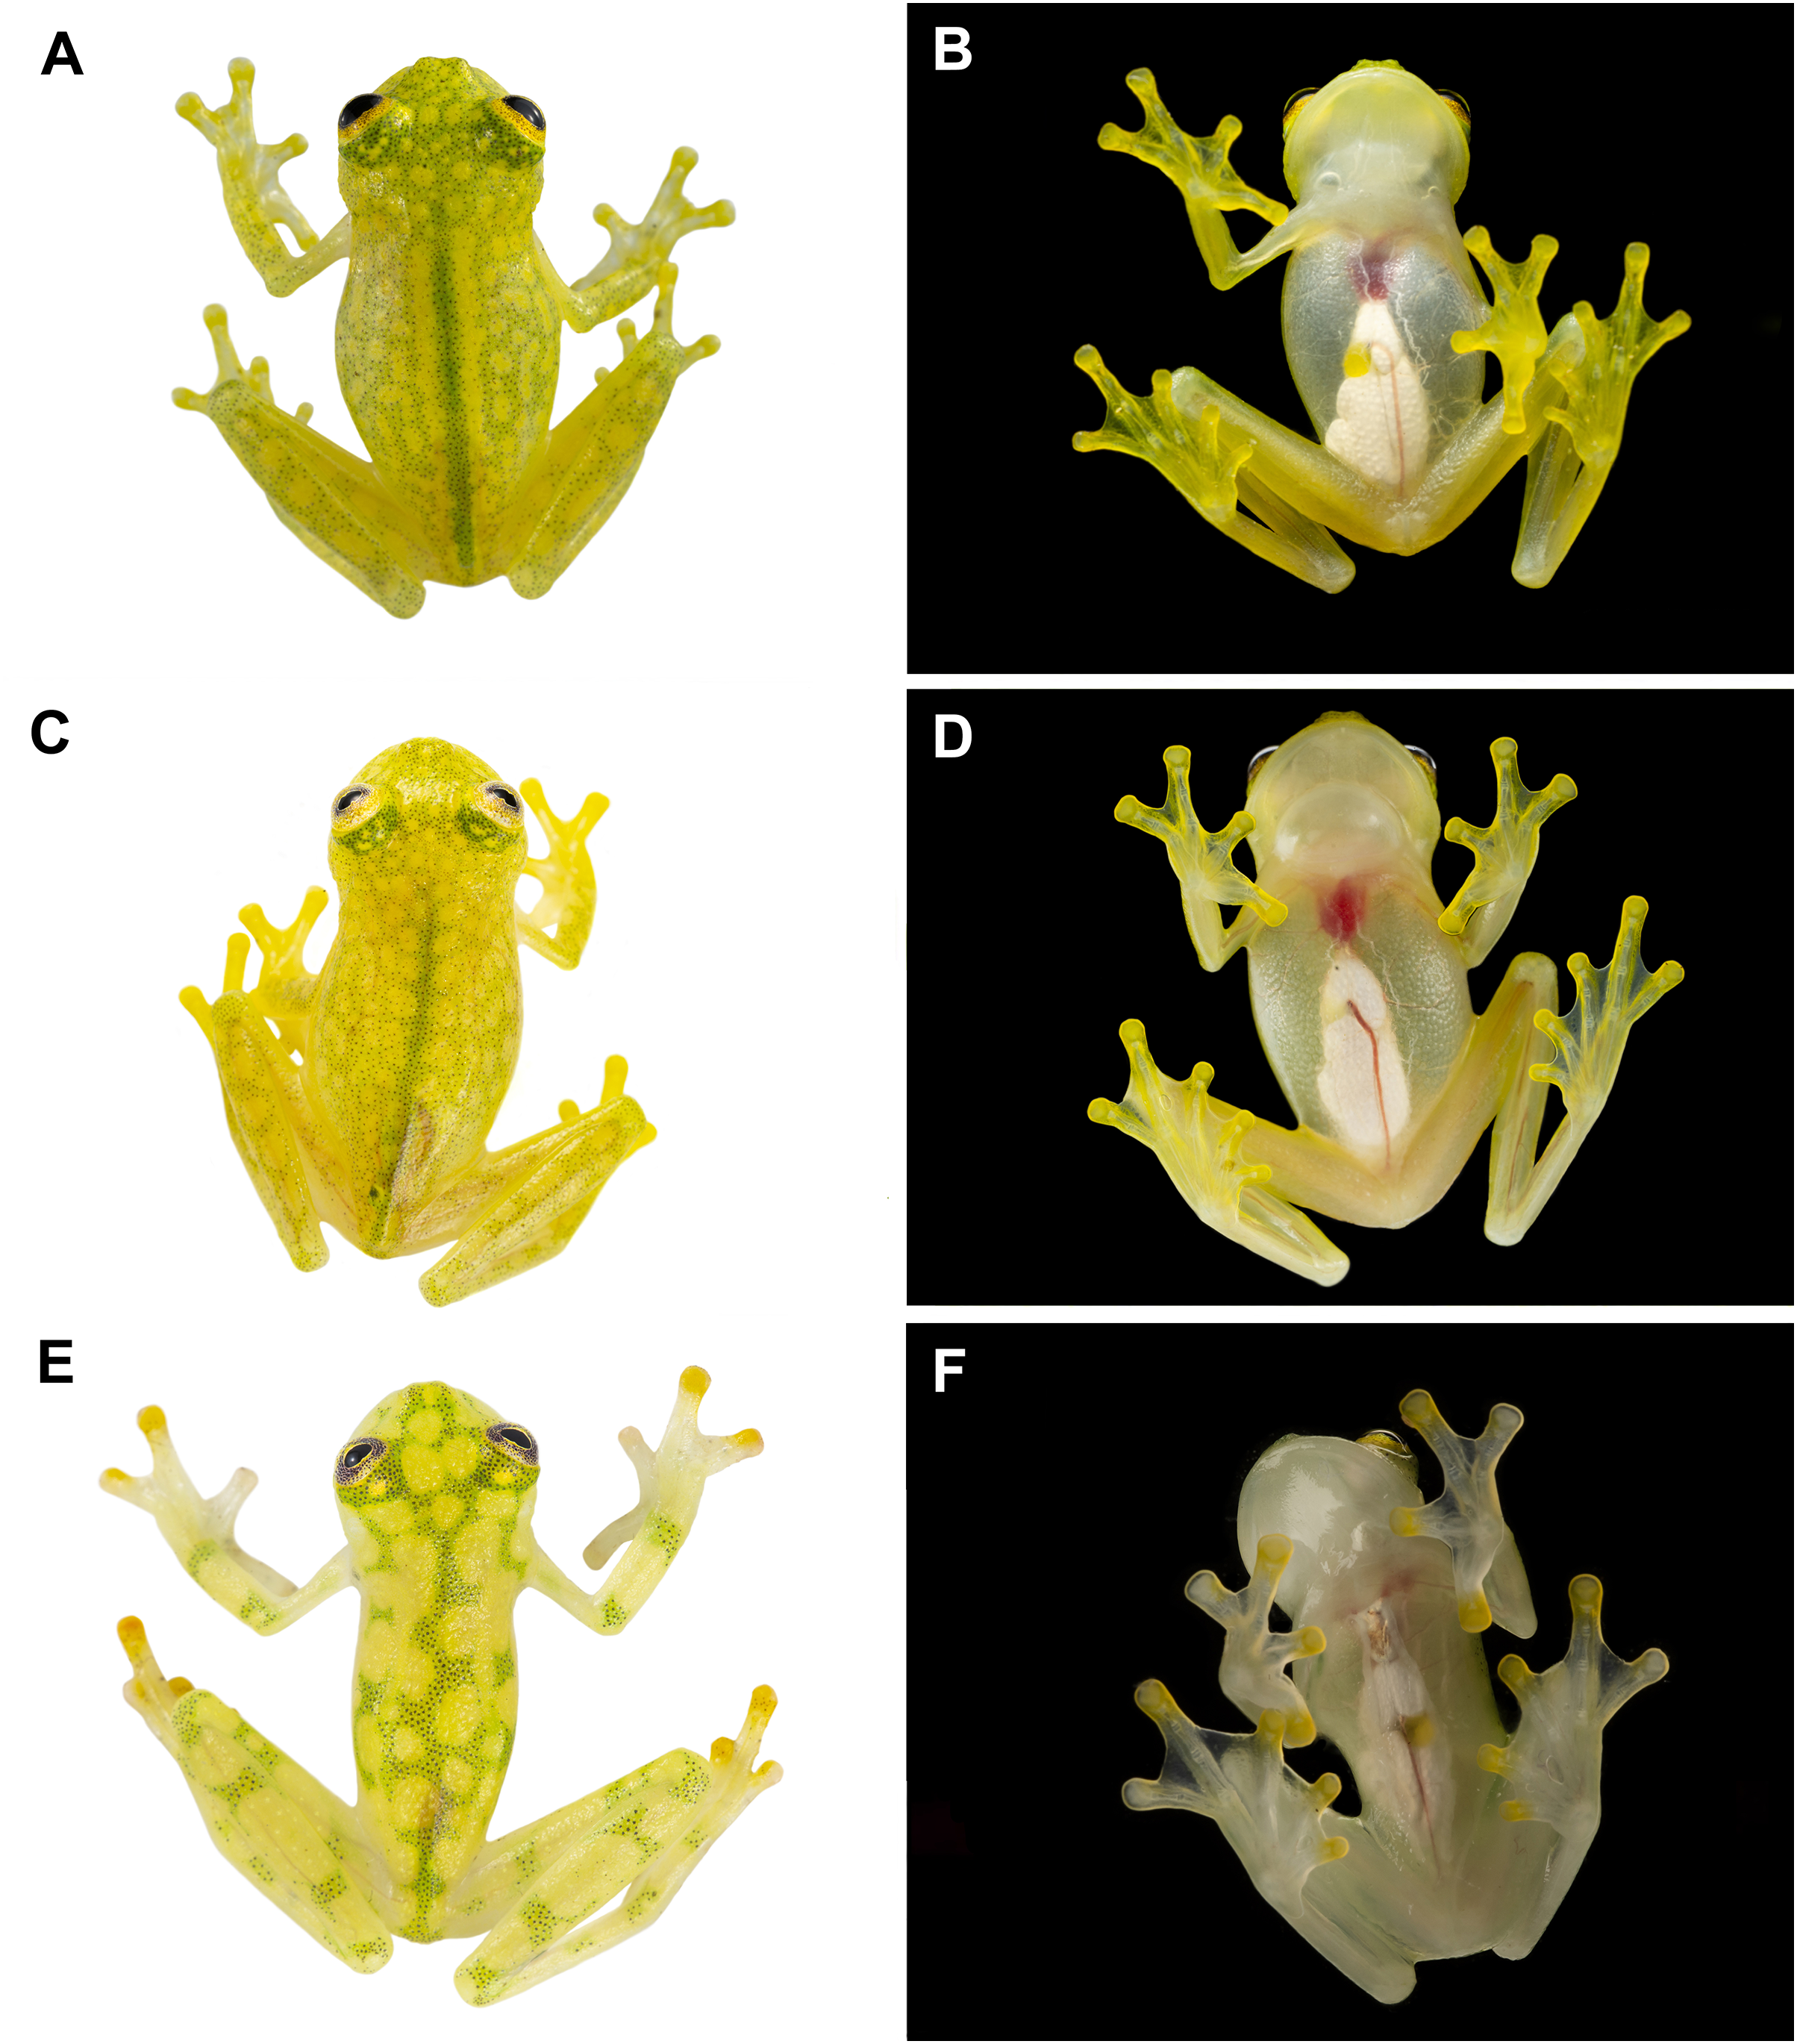 Two new glassfrogs (Centrolenidae: Hyalinobatrachium) from Ecuador, with  comments on the endangered biodiversity of the Andes [PeerJ]